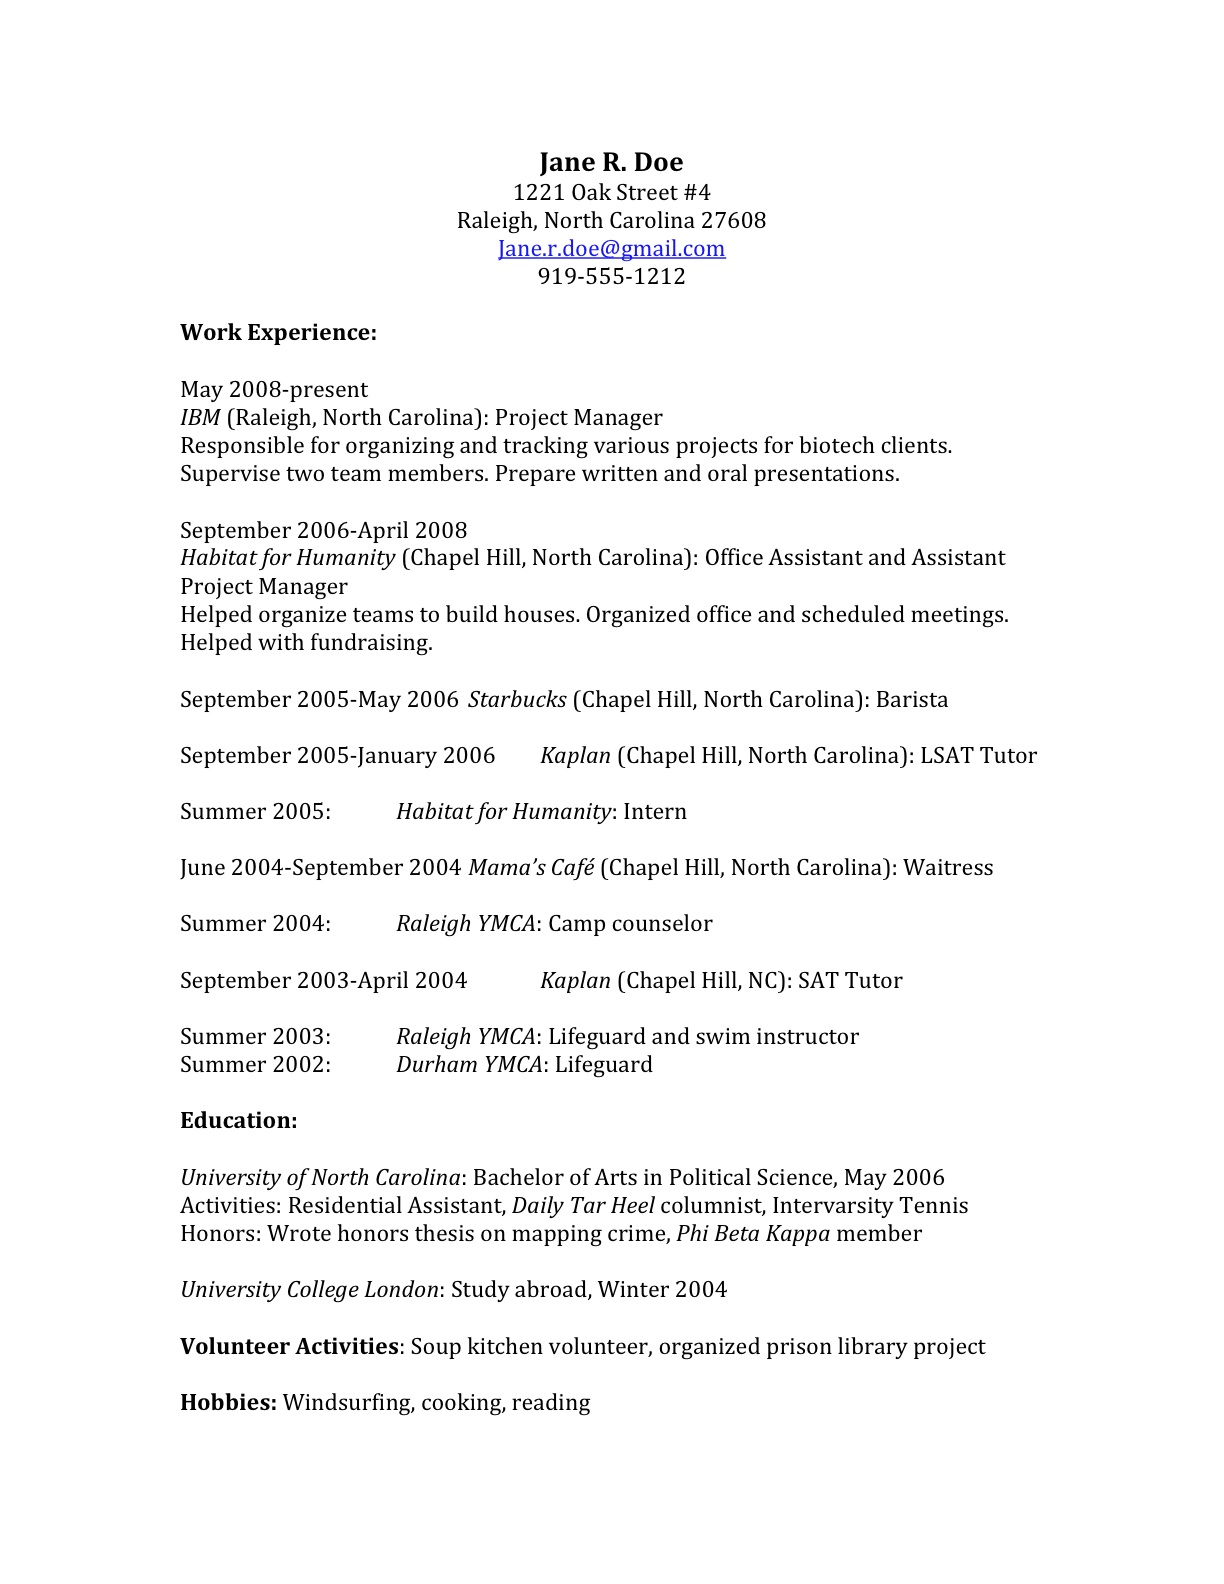 Law School Letter Of Recommendation Template - Law School Admissions Resume Law School Application Resume Samples